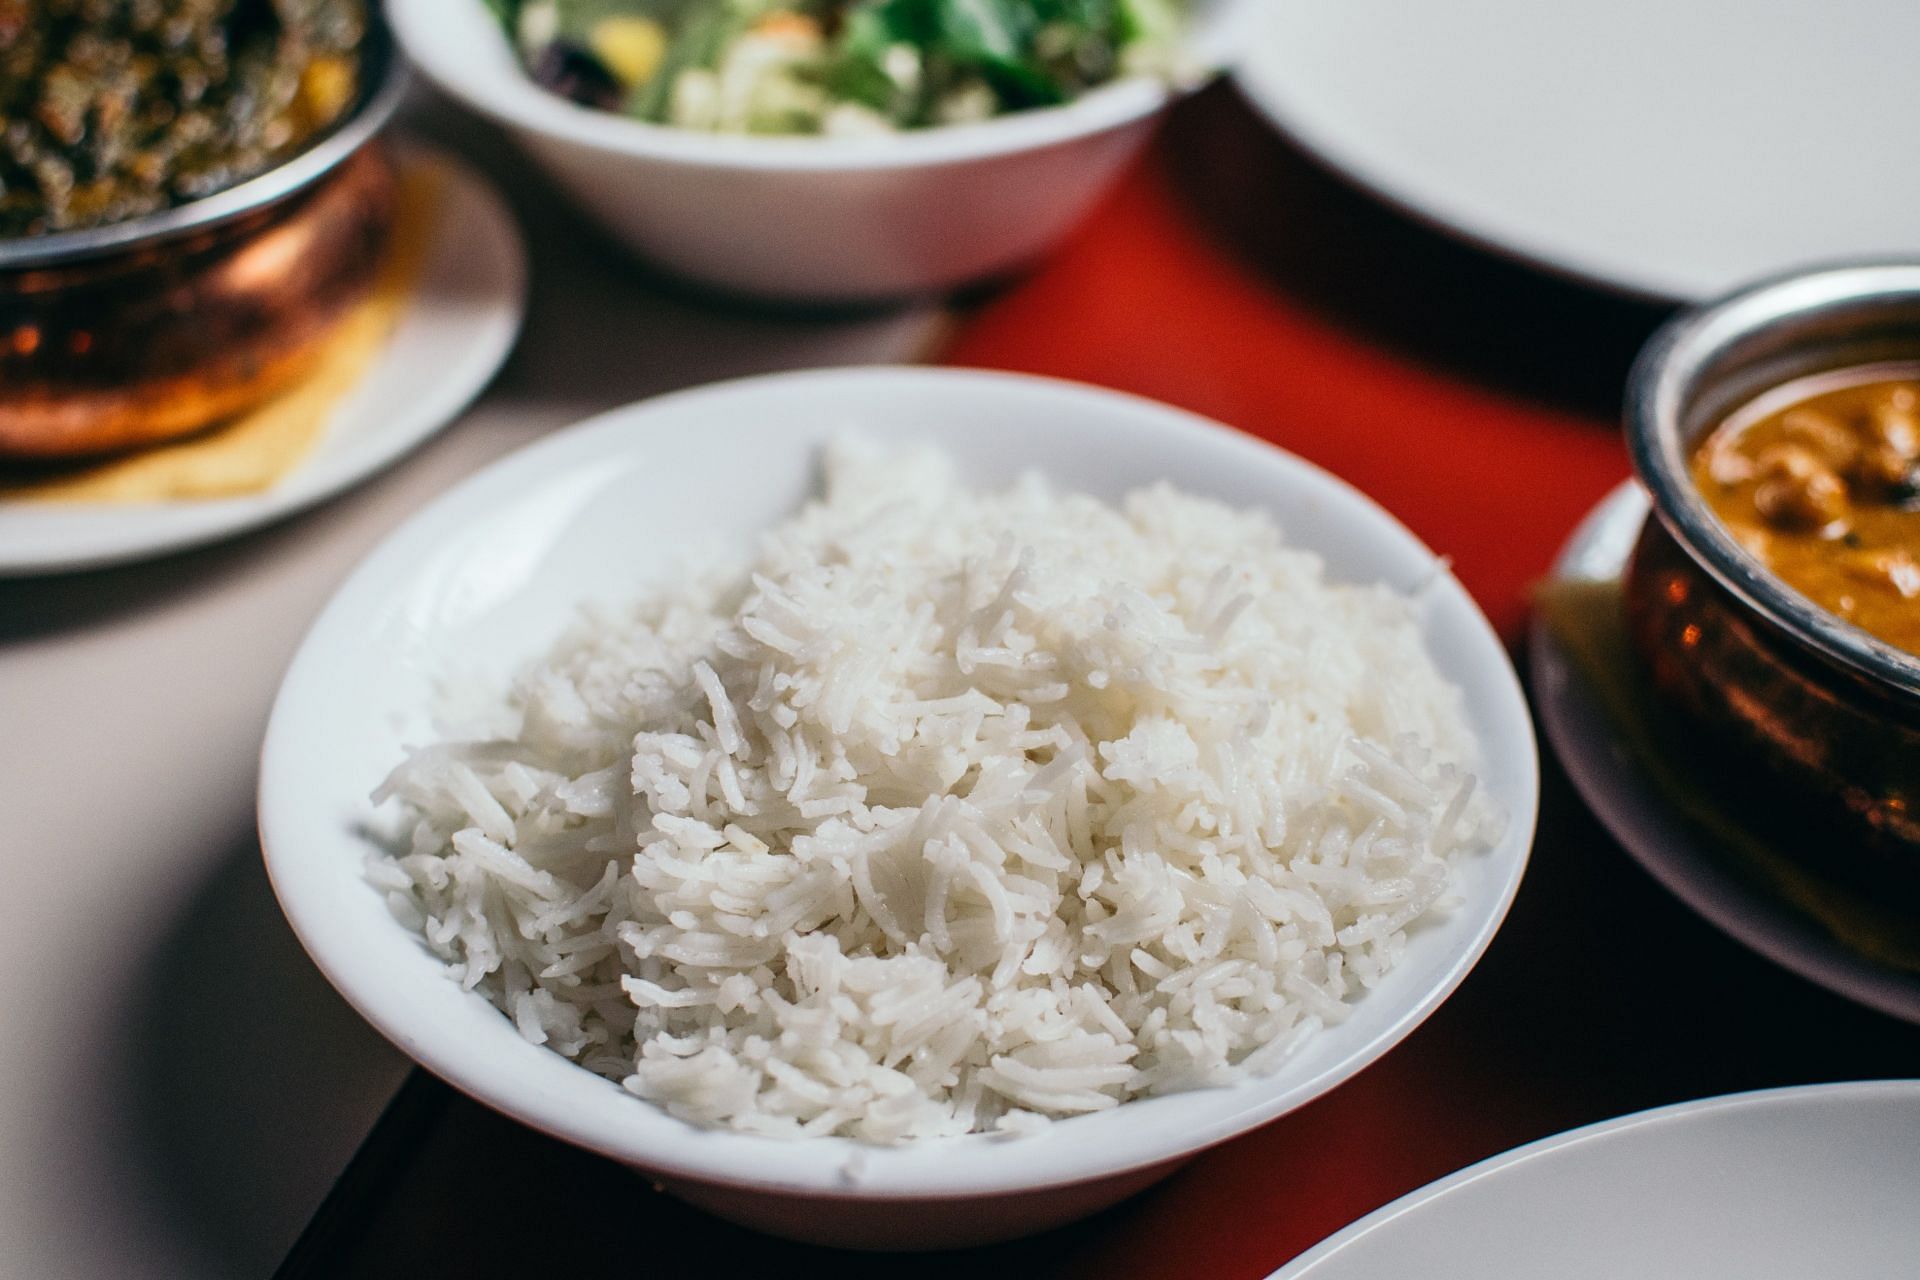 White rice is not good for weight loss. (Image via Unsplash/Pille R Priske)